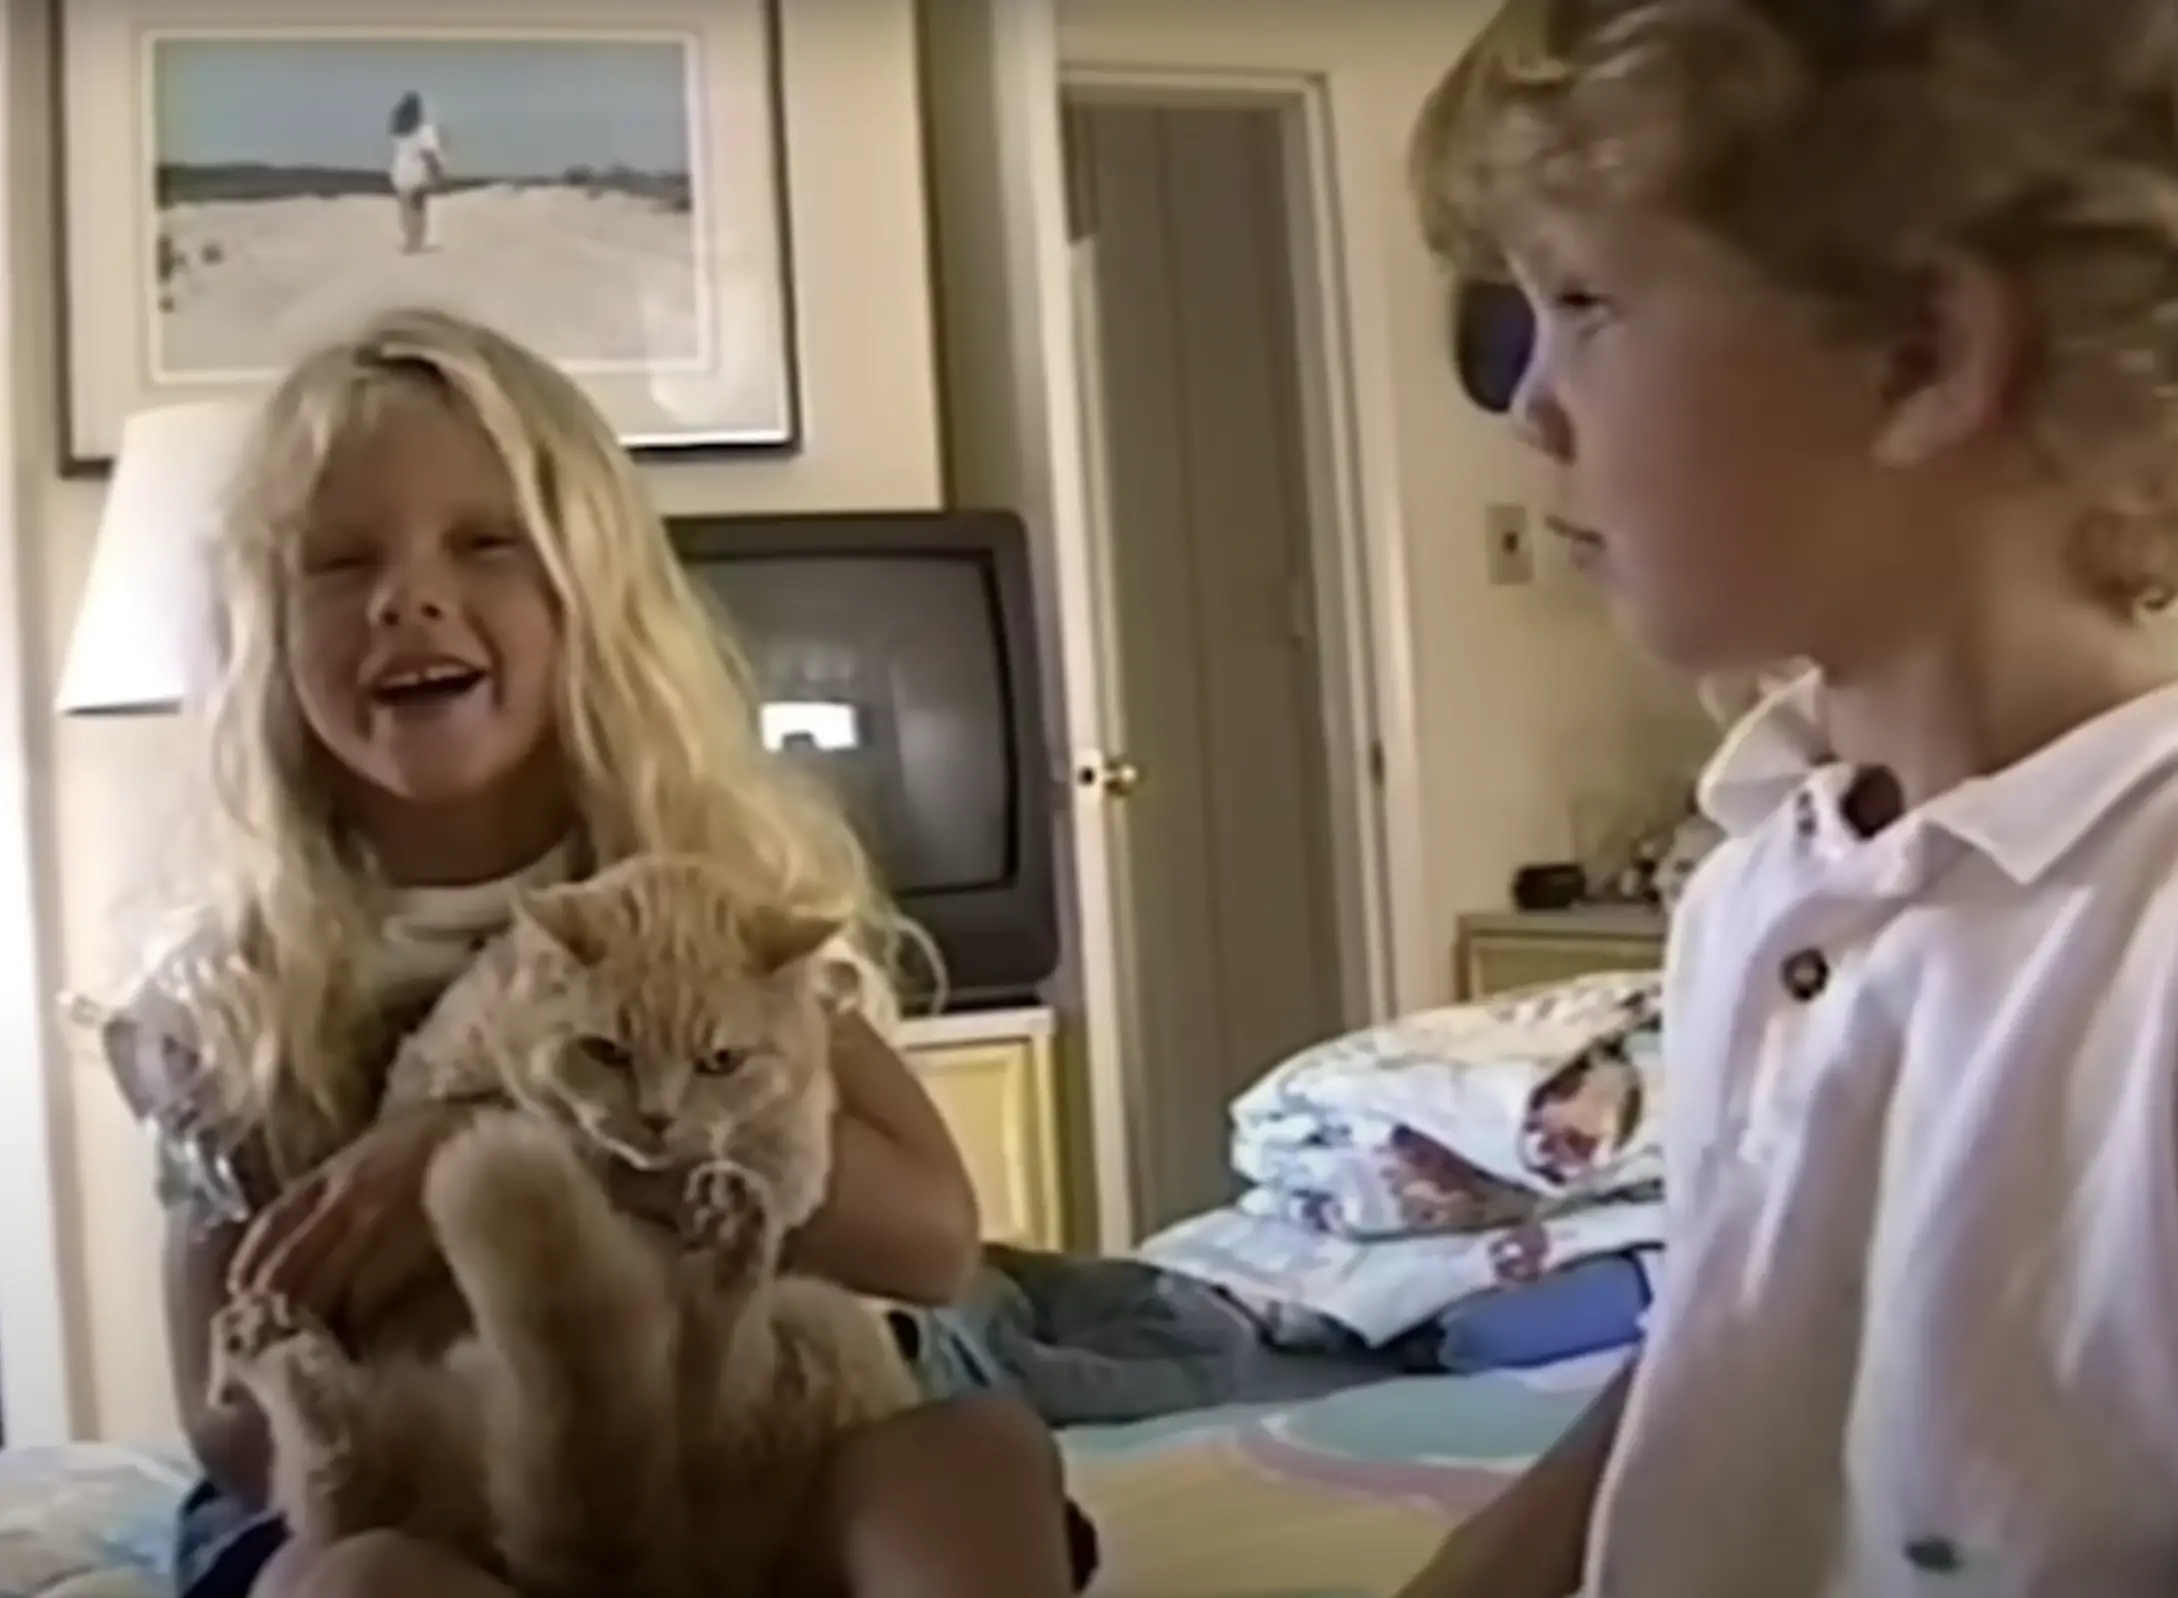 The girl and her brother with their cat | Source: youtube.com/channel/UCqECaJ8Gagnn7YCbPEzWH6g